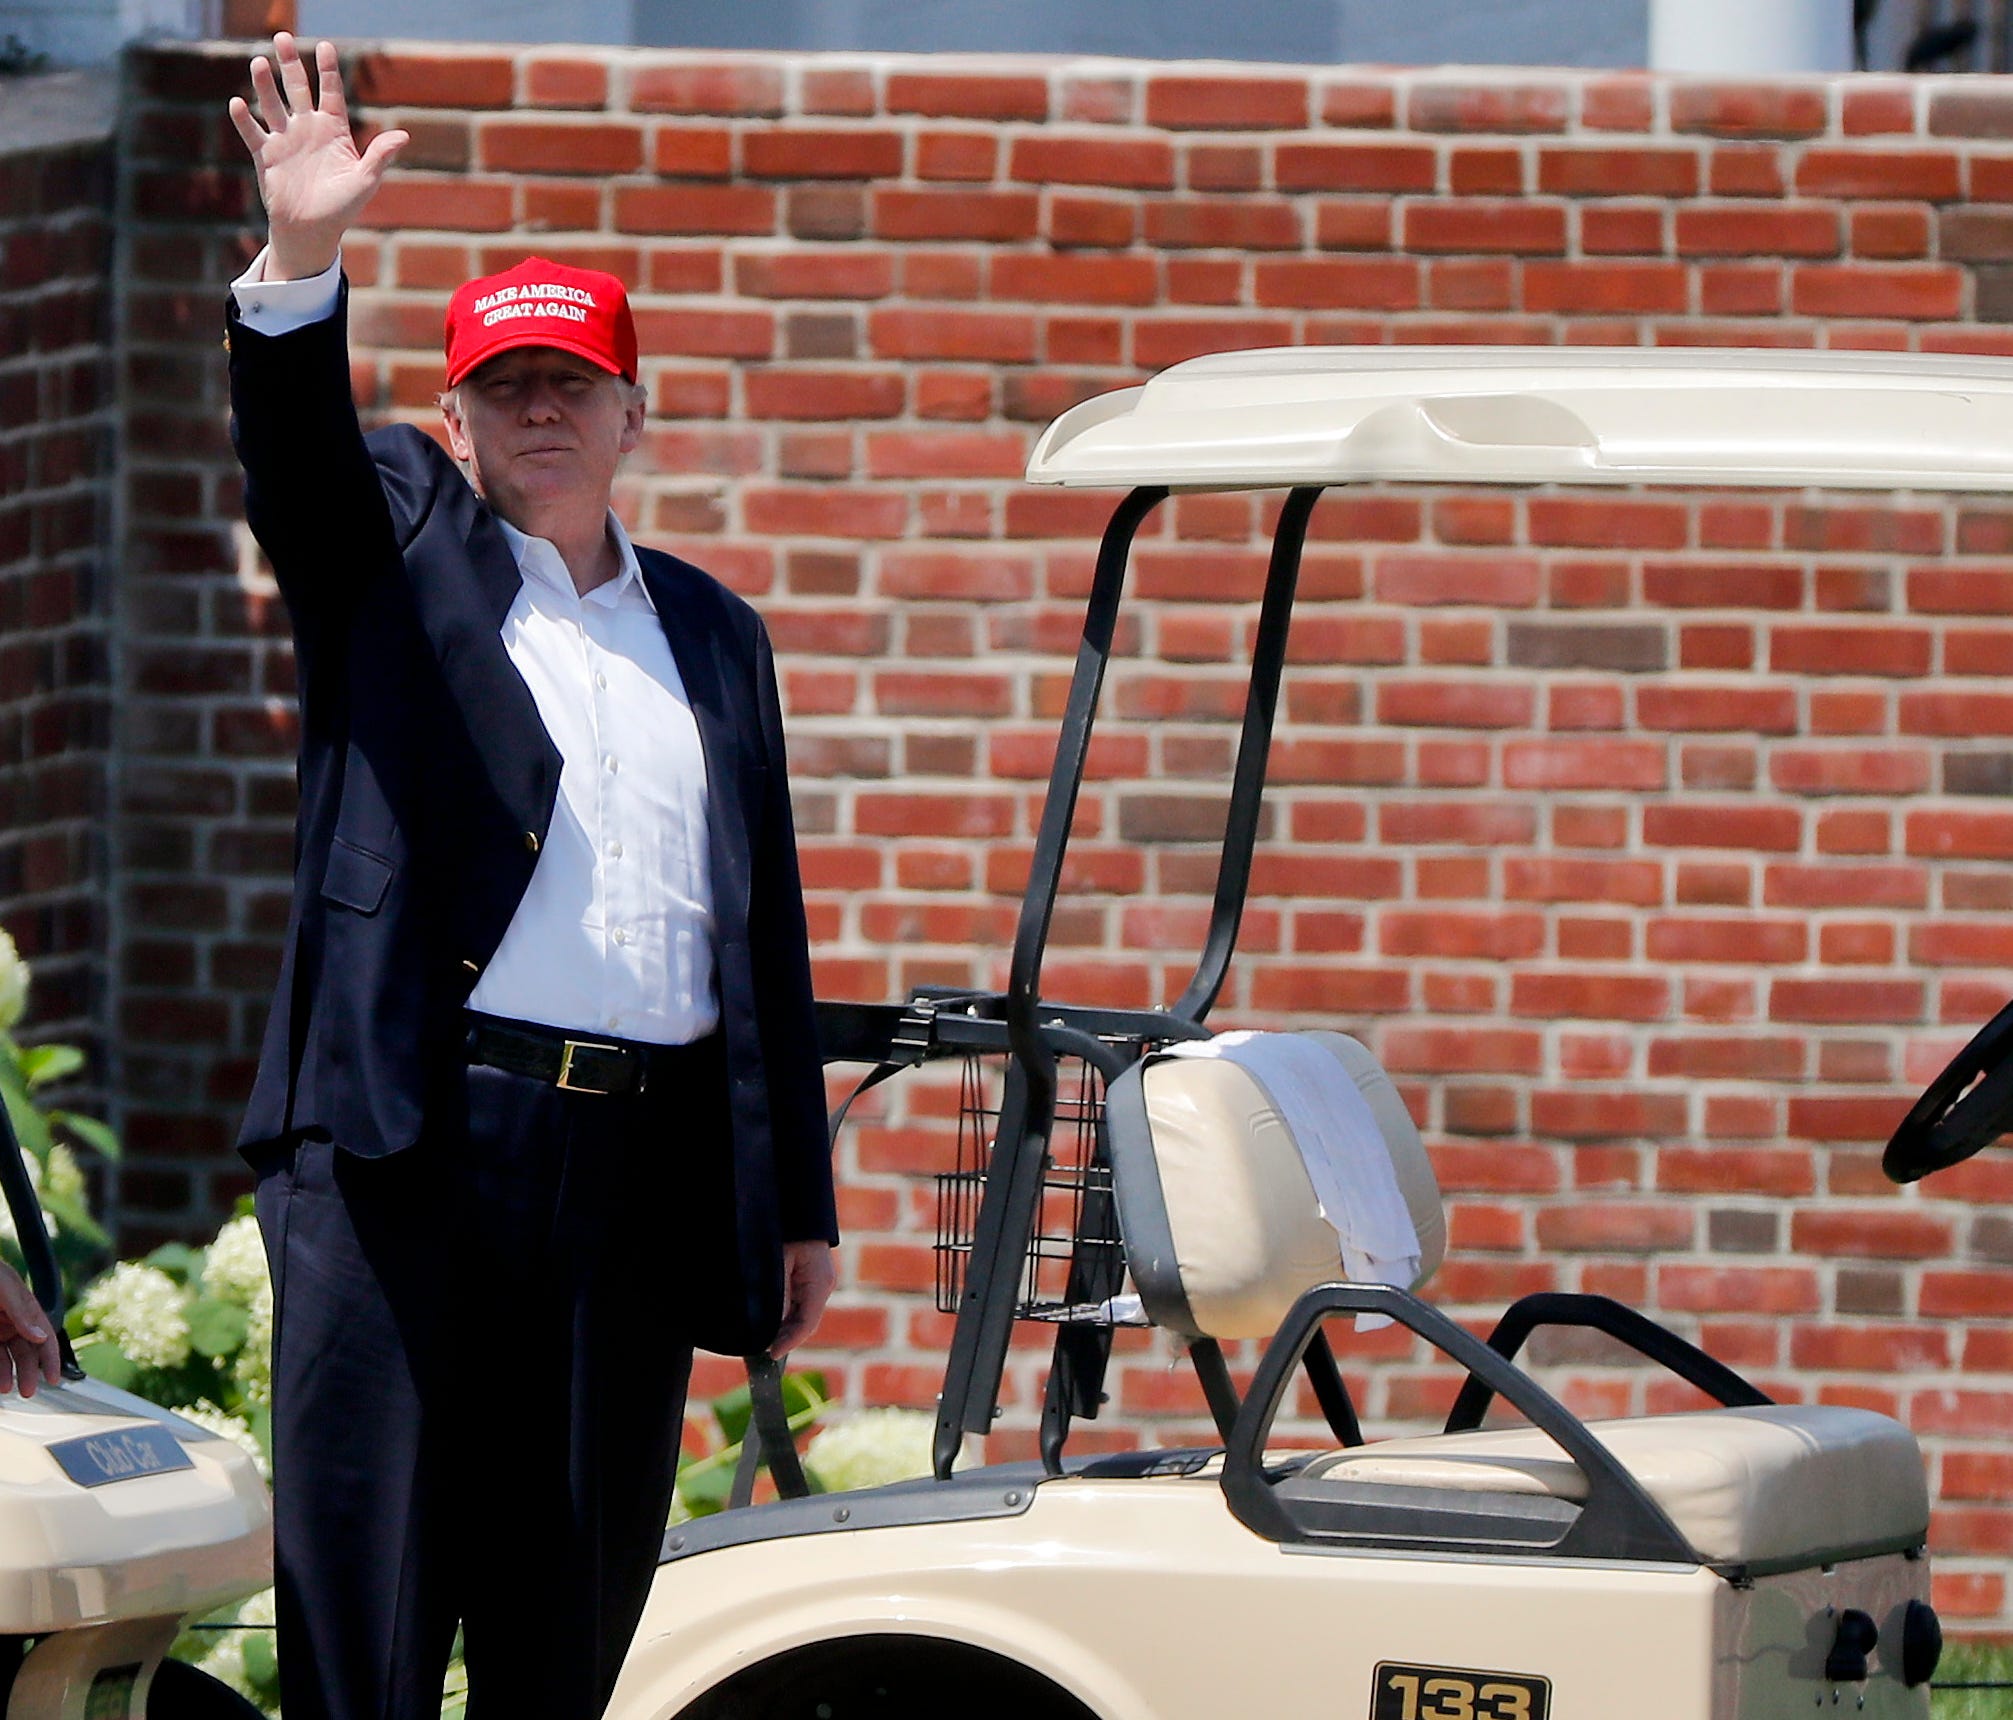 President Trump waves to spectators as he walks out of his residence at the Trump National Golf Club during the third round of the U.S. Women's Open Golf tournament, July 15, 2017, in Bedminster, N.J.